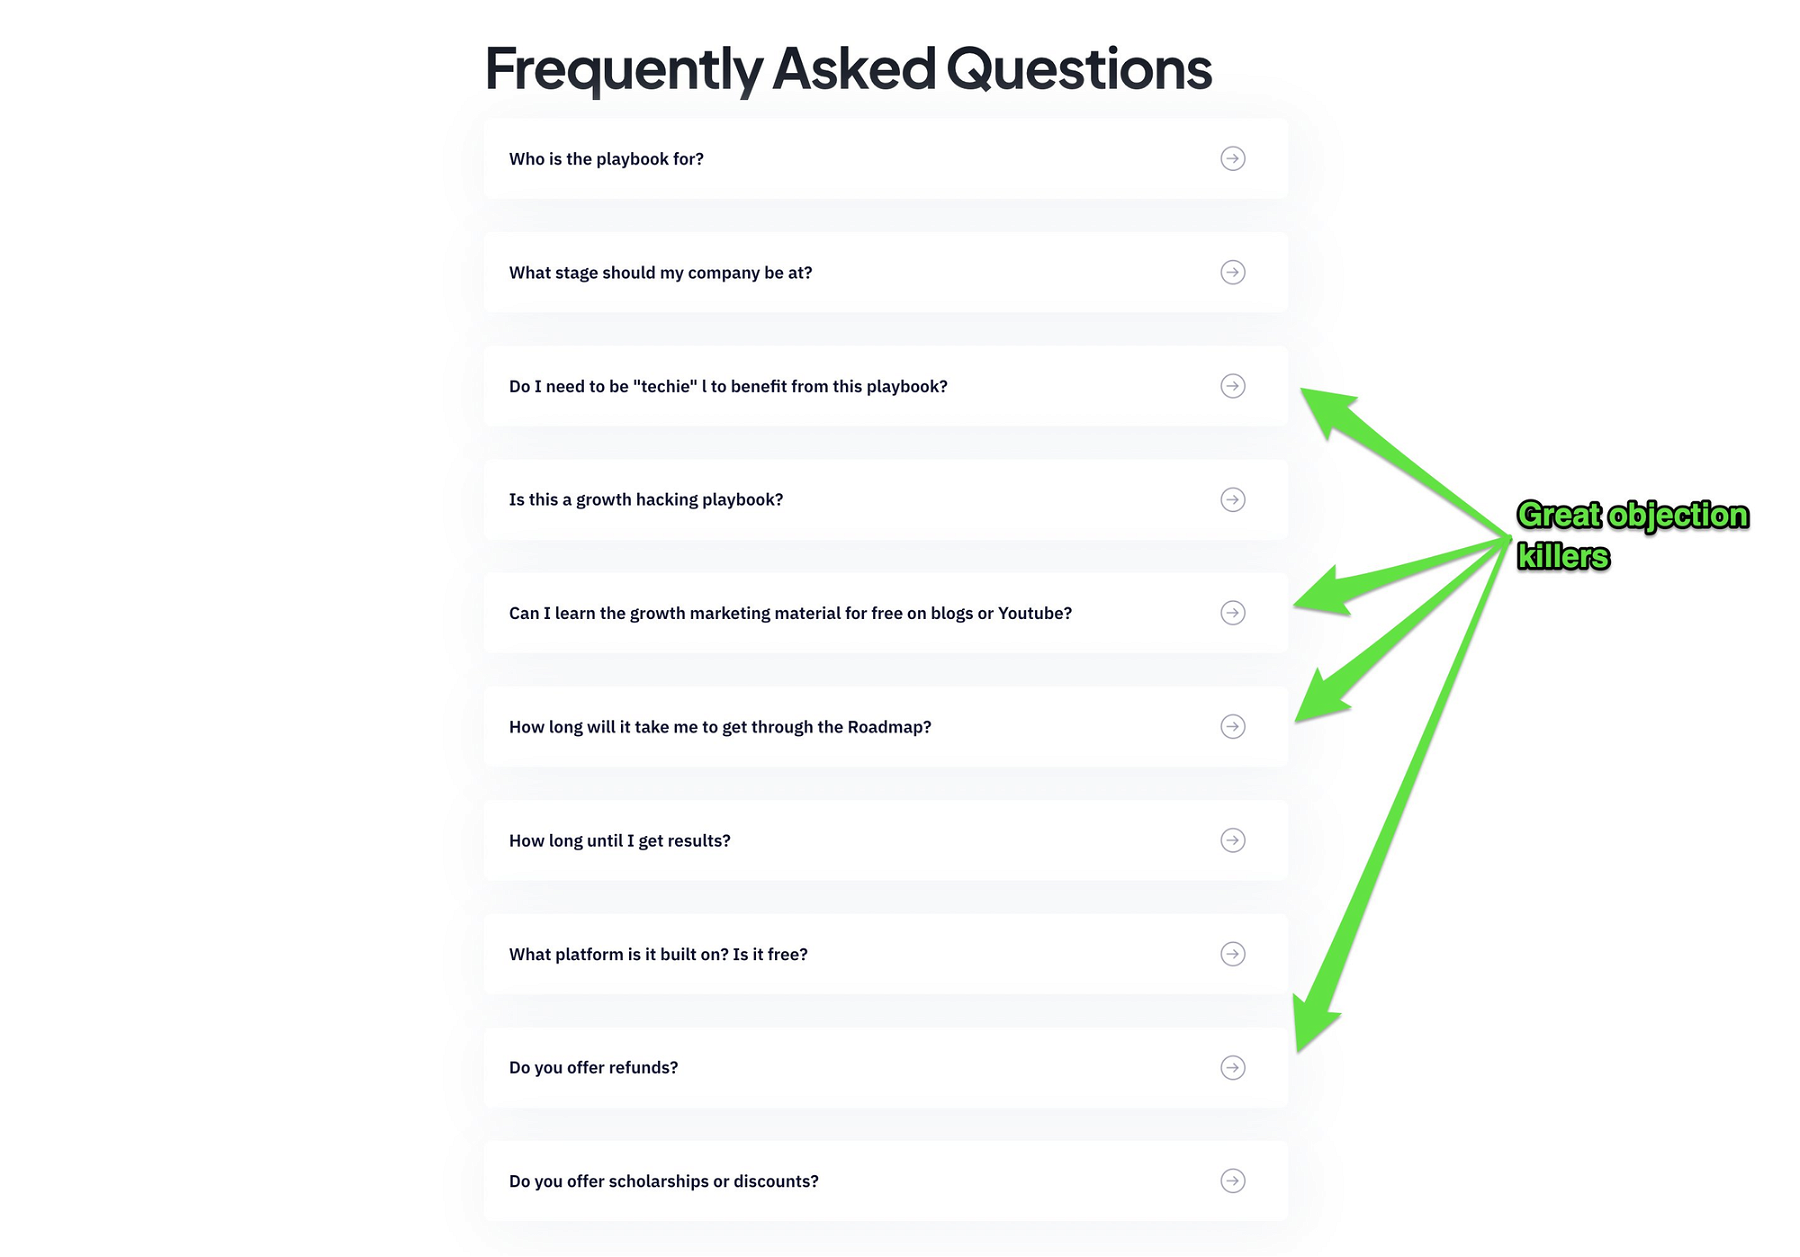 Another FAQ section example handling some common objections.